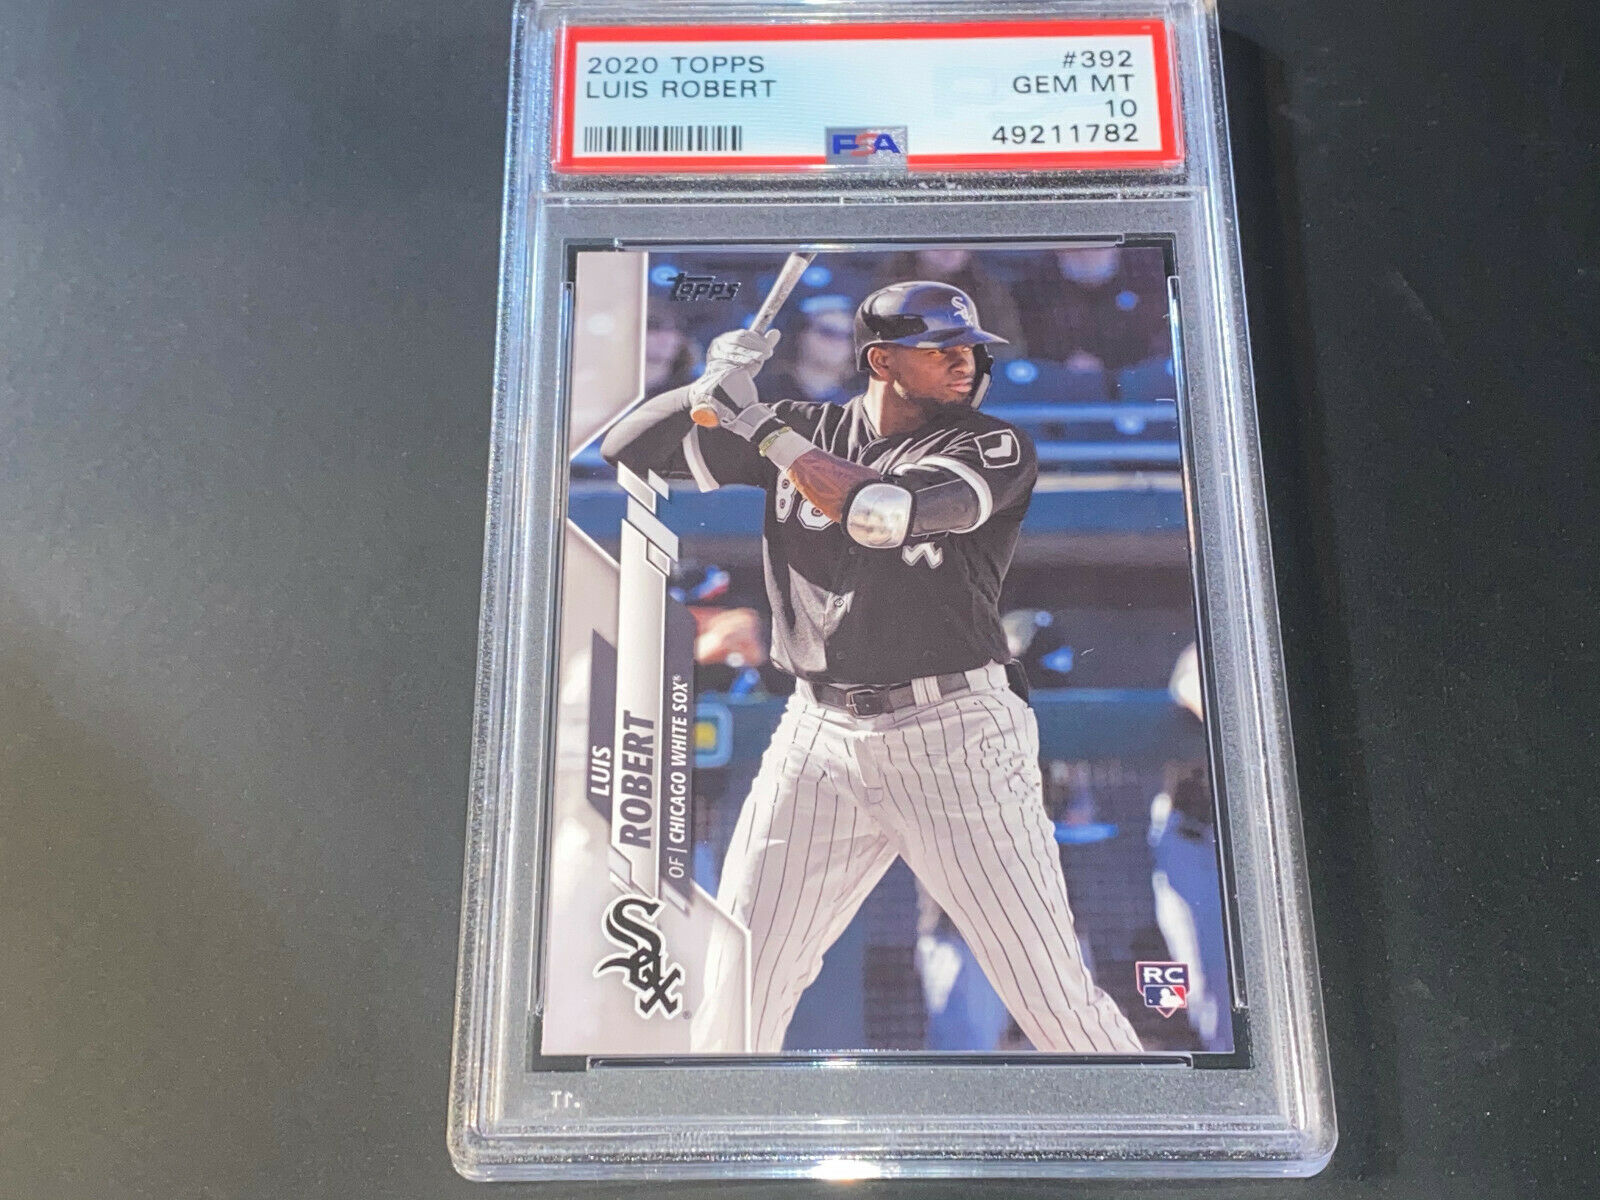 Luis Robert Chicago White Sox 2020 Topps Rookie Card PSA 10 Mint f